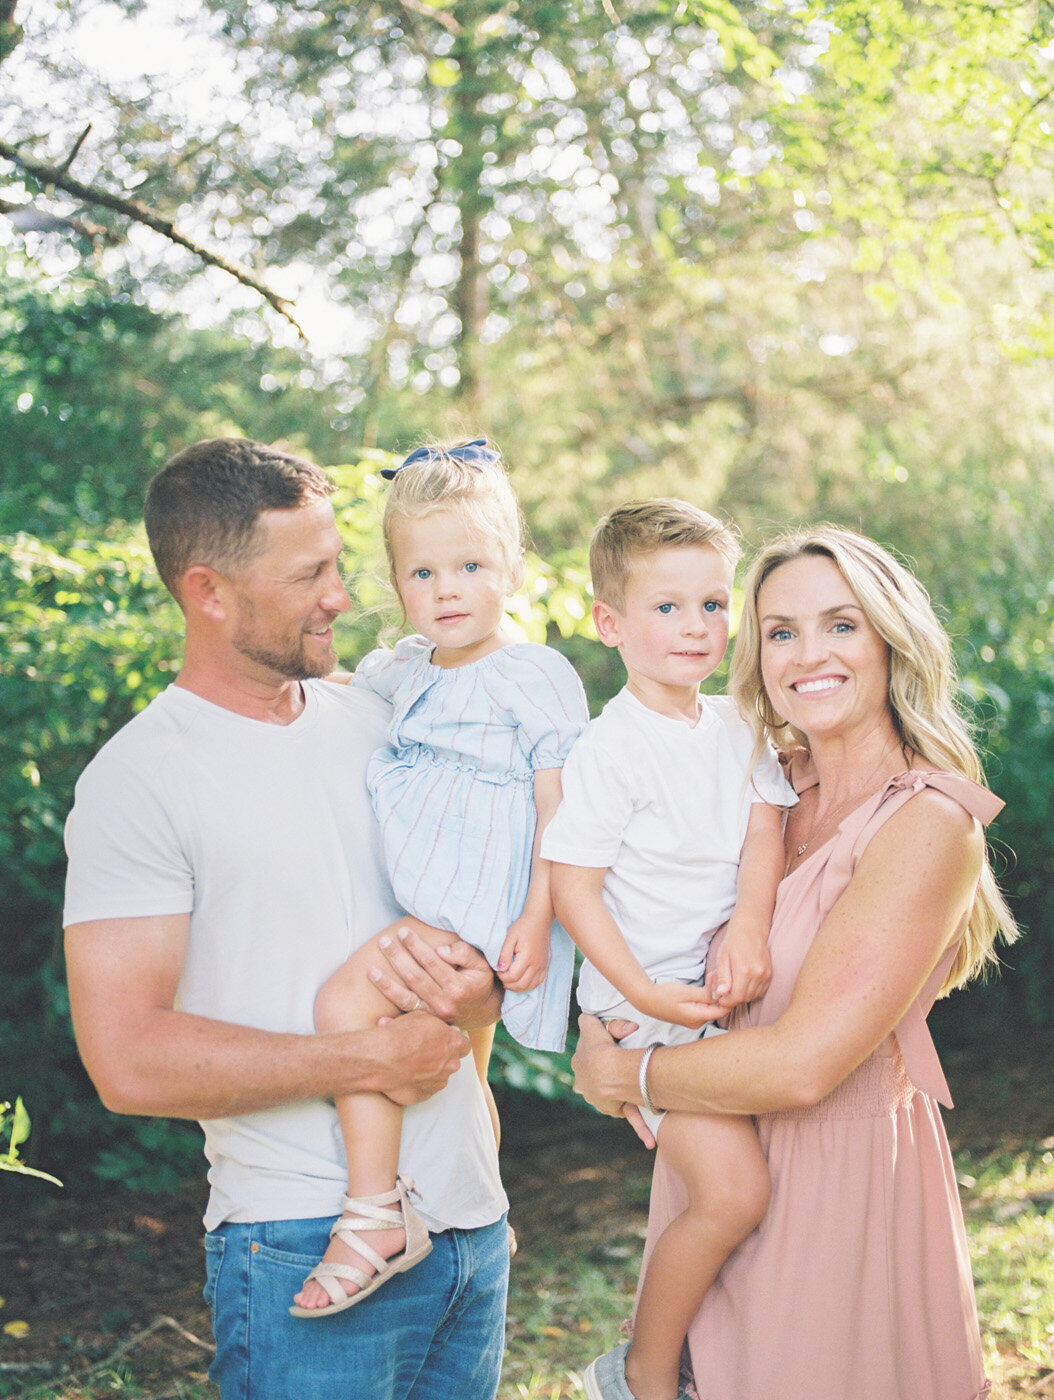 Raleigh Family Photographer | Jessica Agee Photography - 014